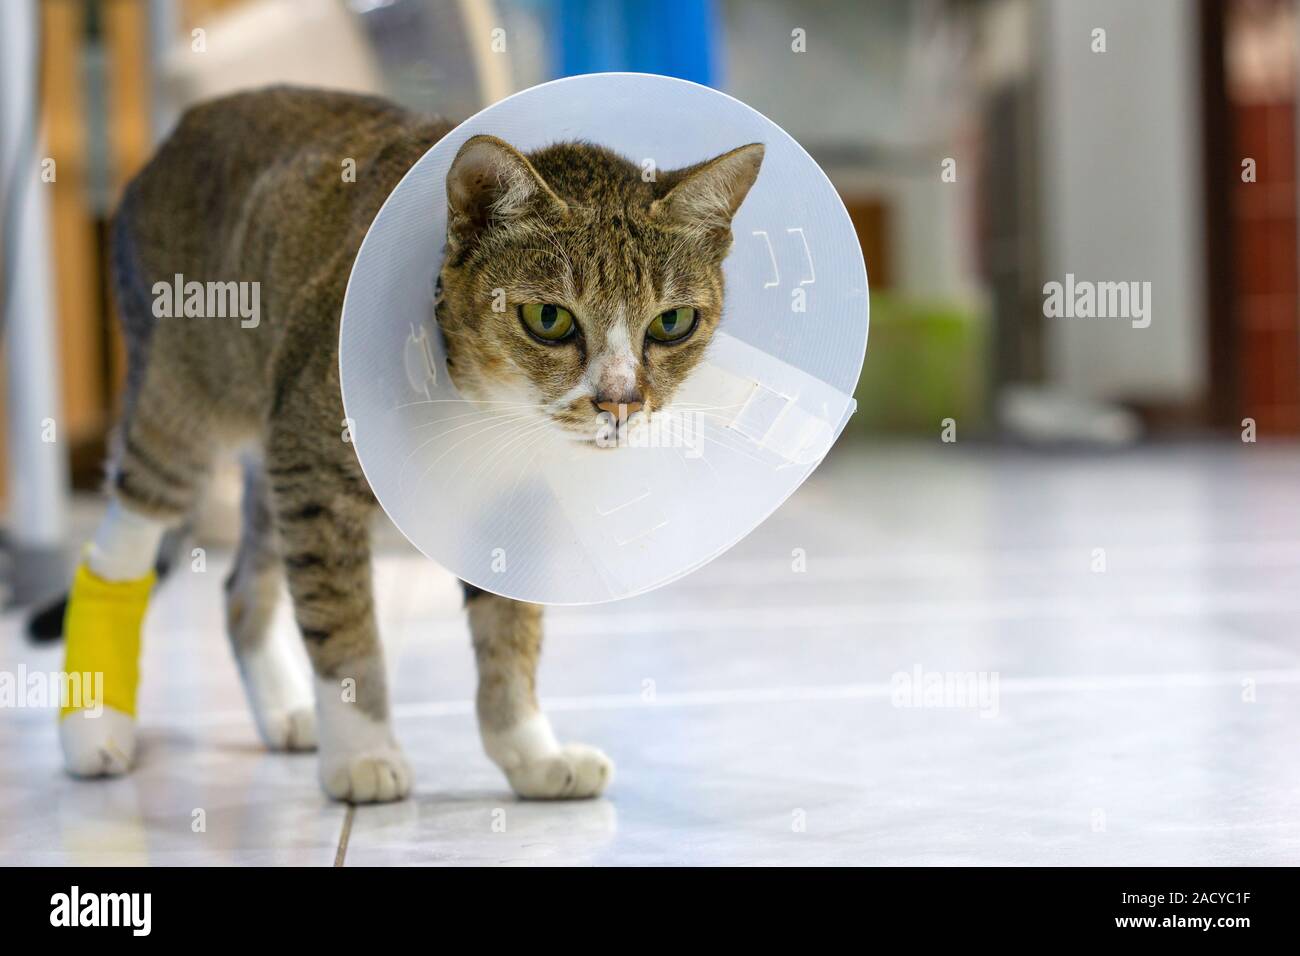 Sick cat with veterinary cone or plastic cone collar on its head to protect cat from licking a wound. Stock Photo